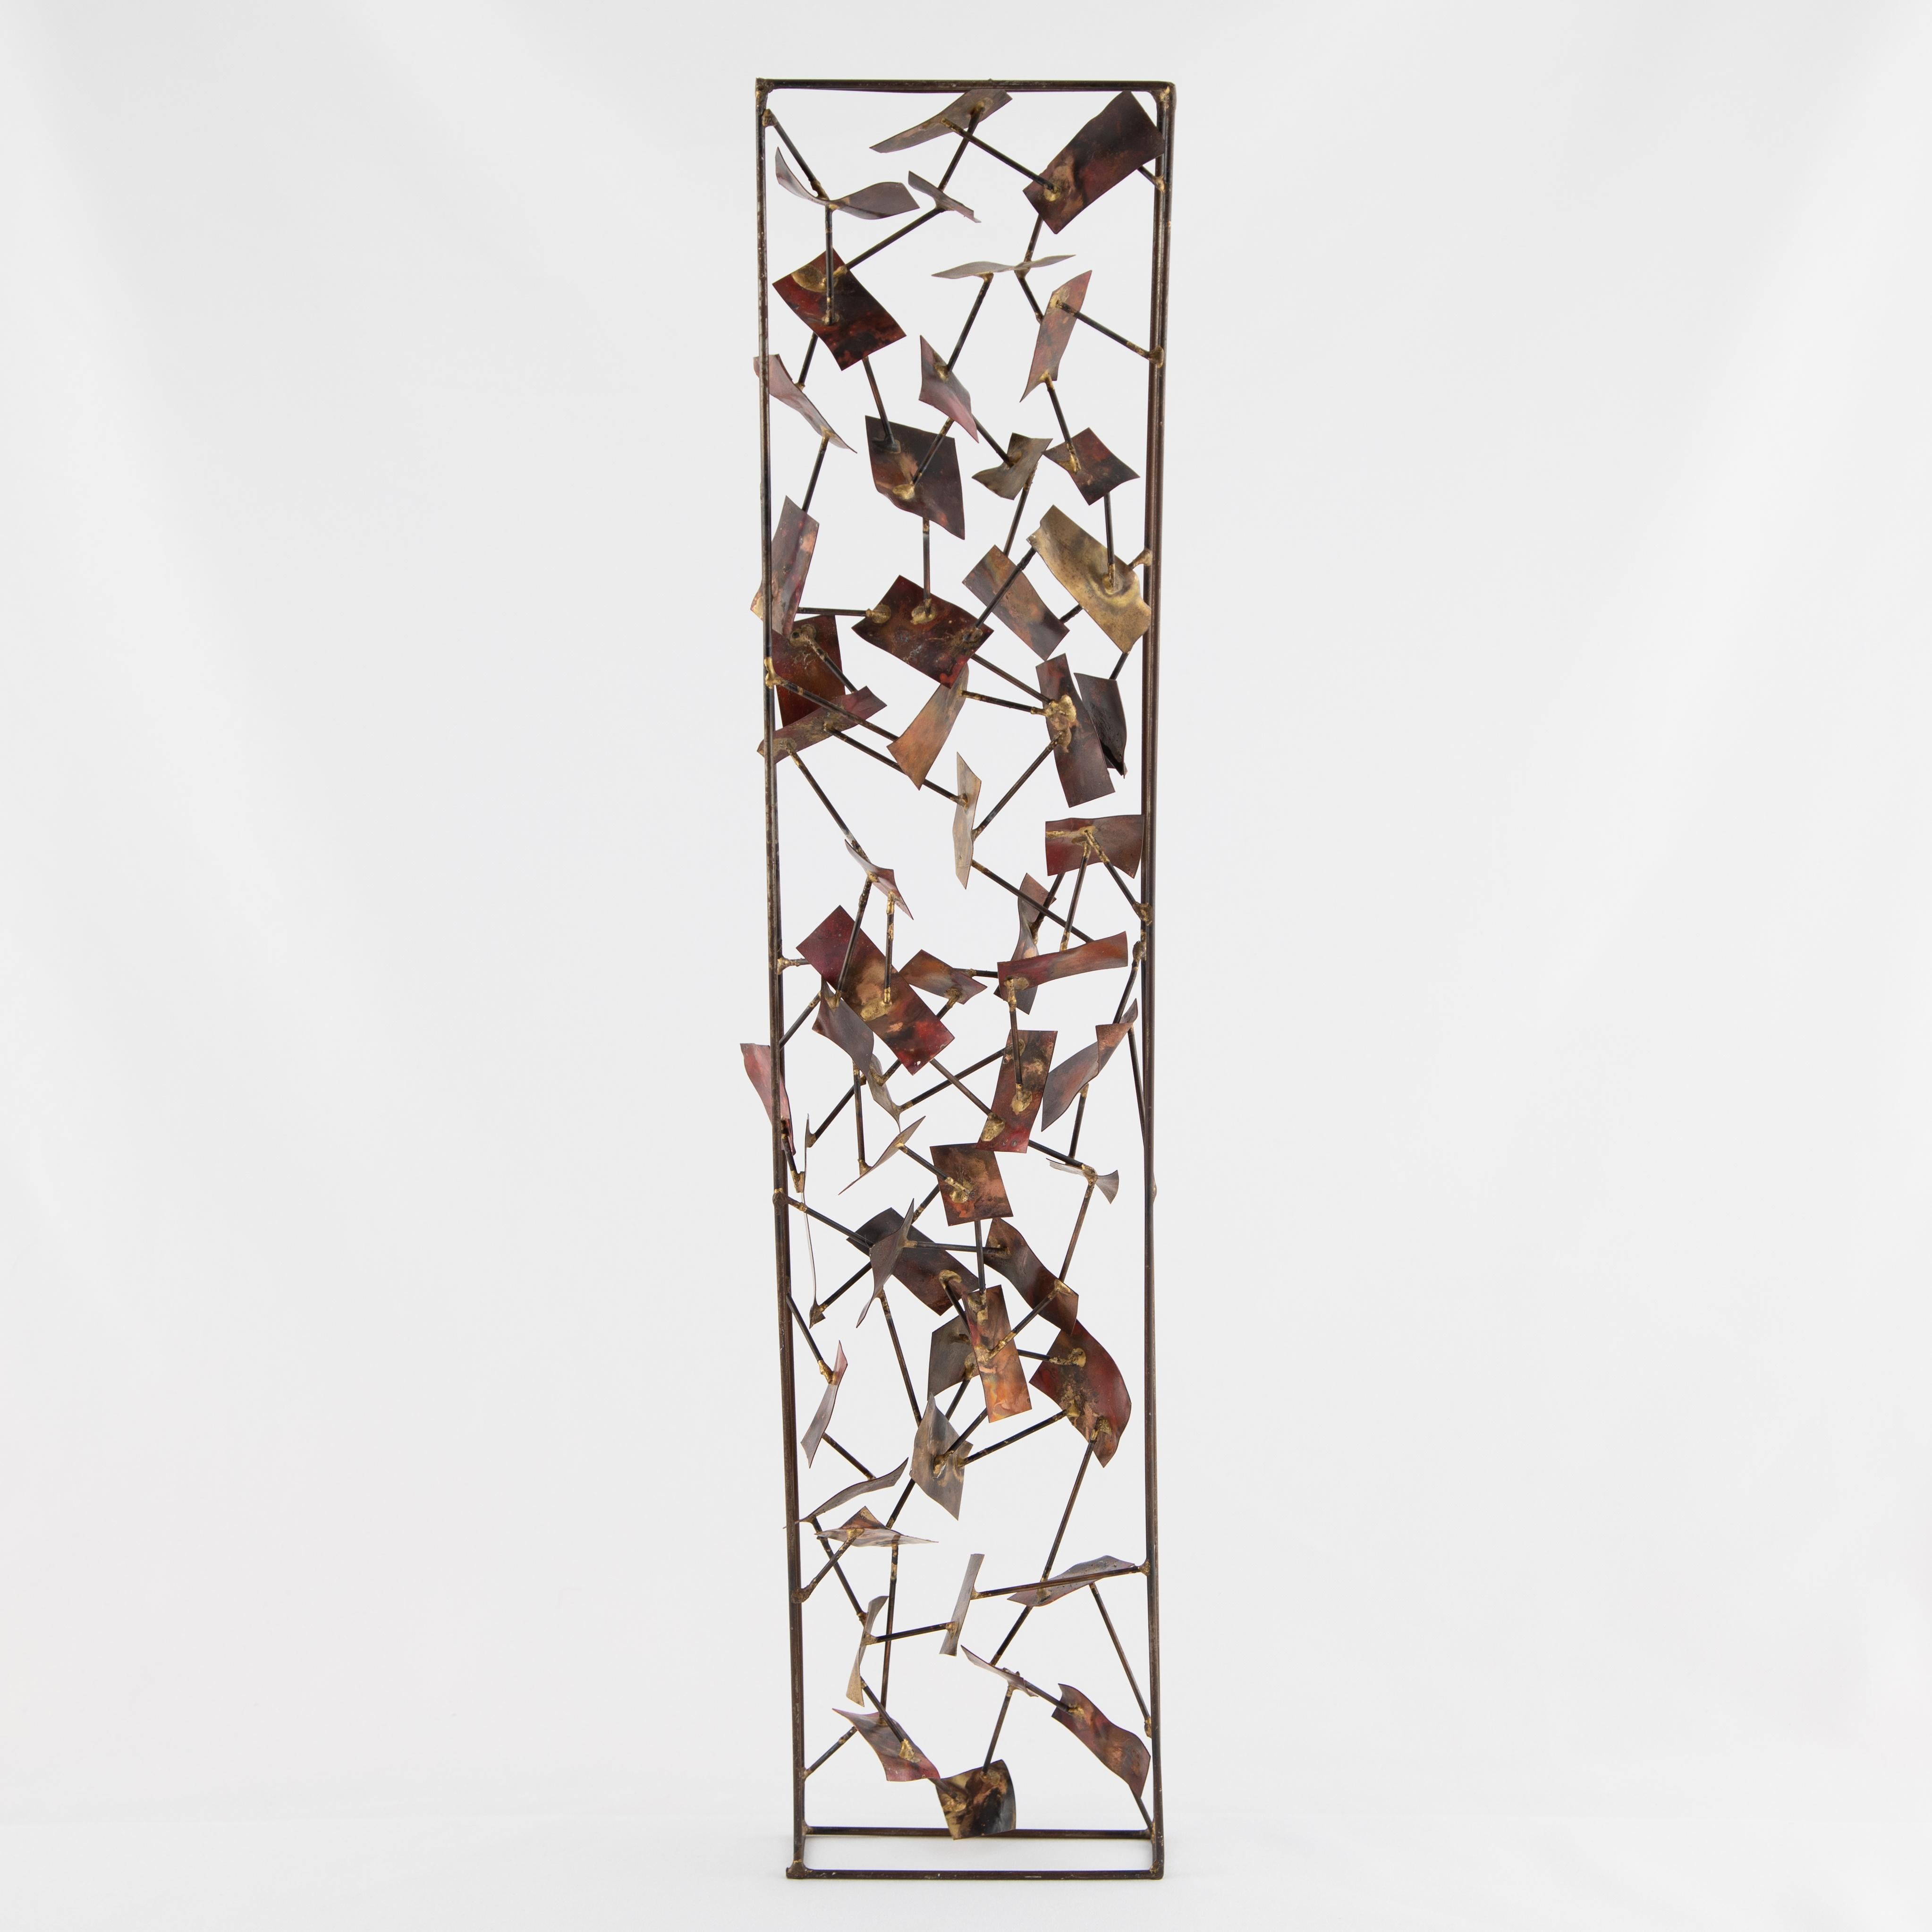 A series of undulating copper rectangles Cascade like confetti in this tabletop sculpture by New York artist Silas Seandel. The panels are connected to one another and the rectangular frame with brass brazing and steel rods. A lovely piece with a